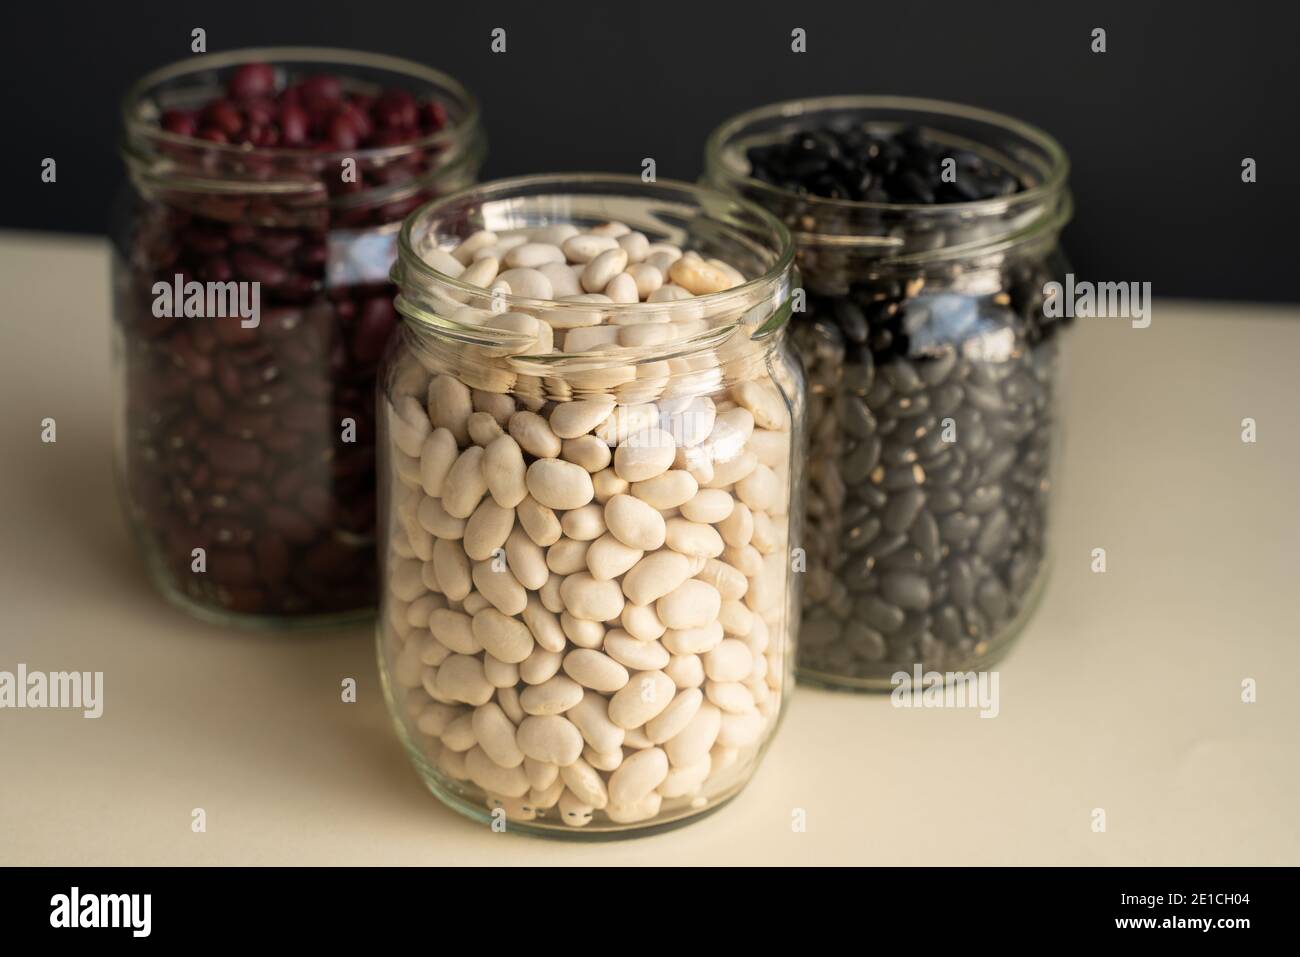 glass jar with black bean, red kidney bean and white bean. navy bean, bean, white kidney bean on white backdrop black background Stock Photo